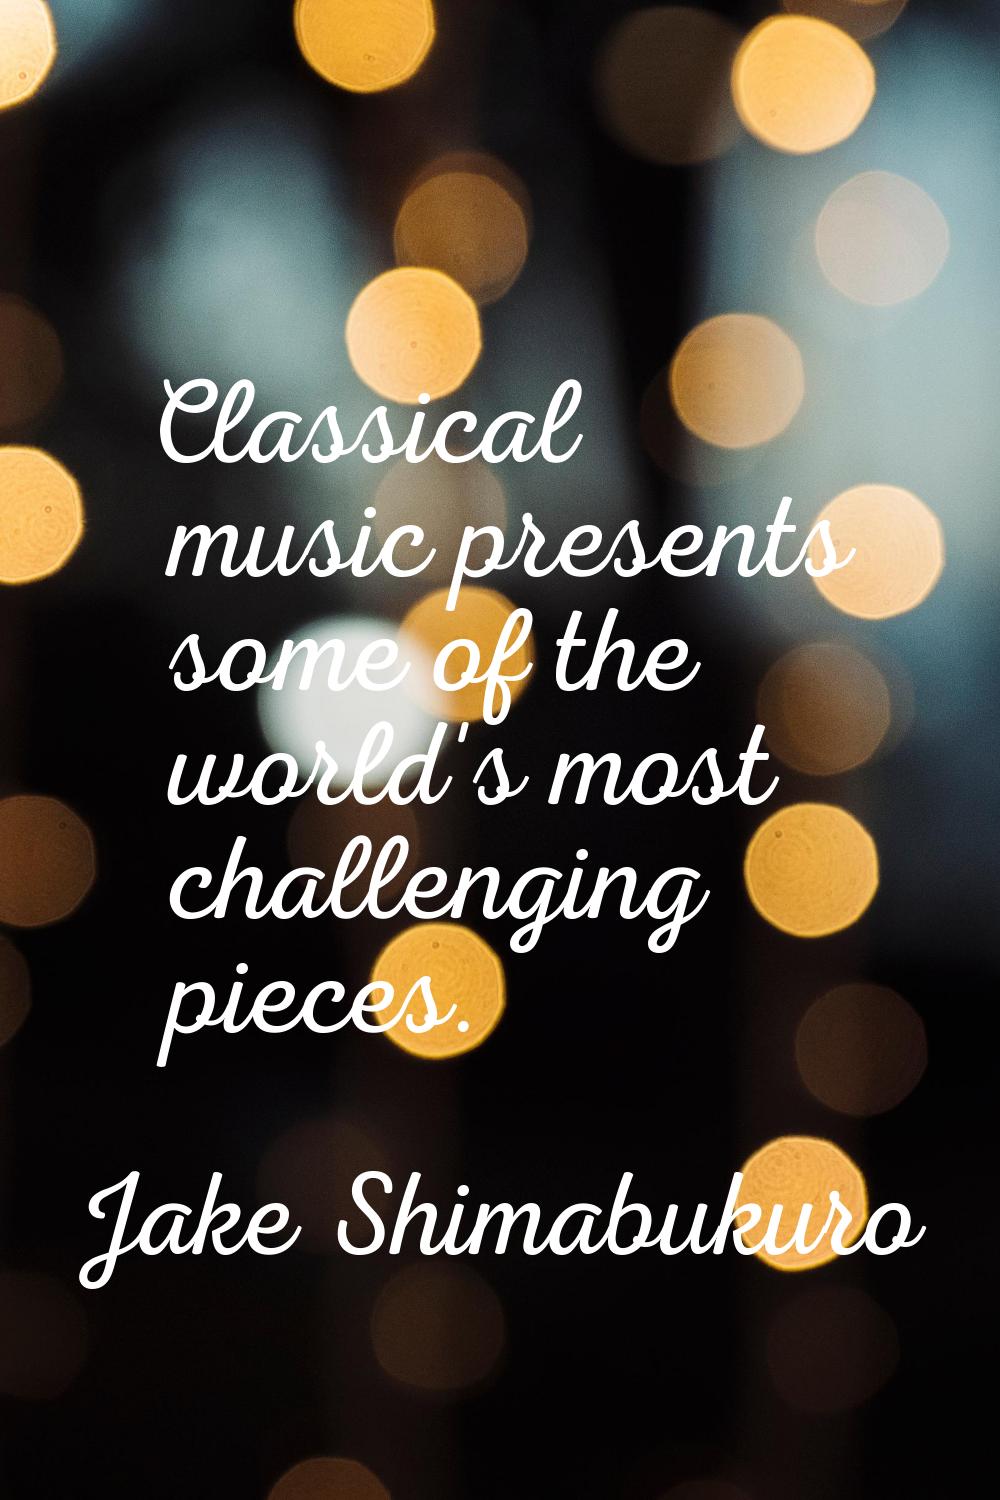 Classical music presents some of the world's most challenging pieces.